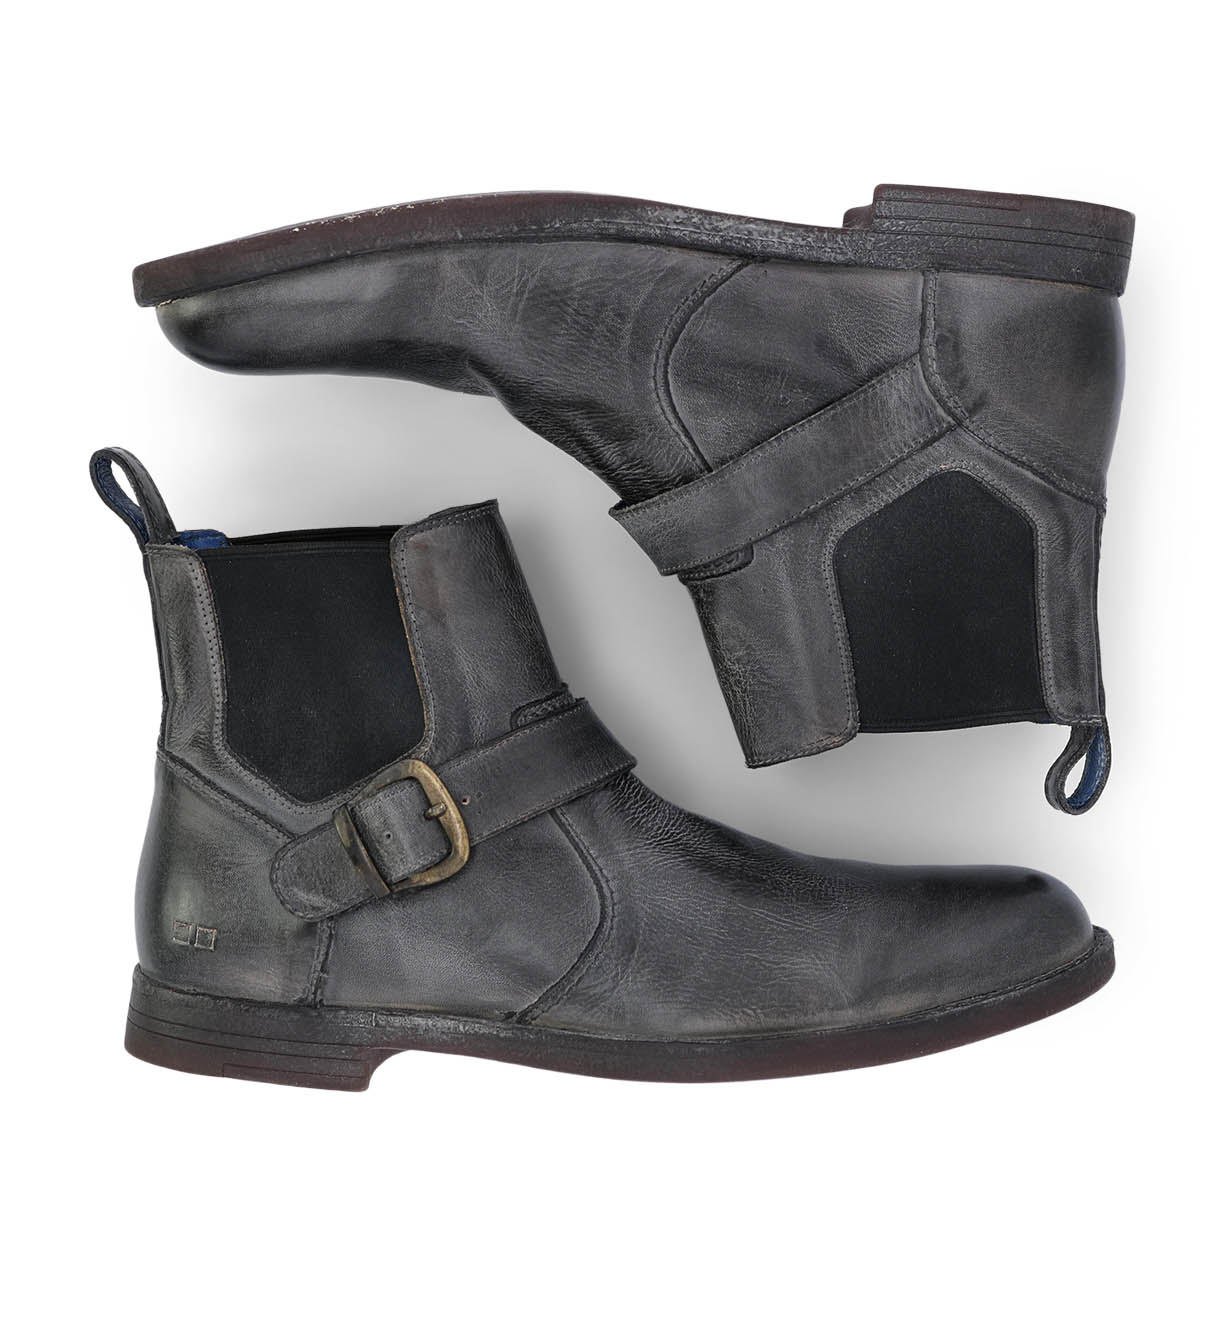 A pair of grey Bed Stu Michelangelo chelsea boots on a white background.